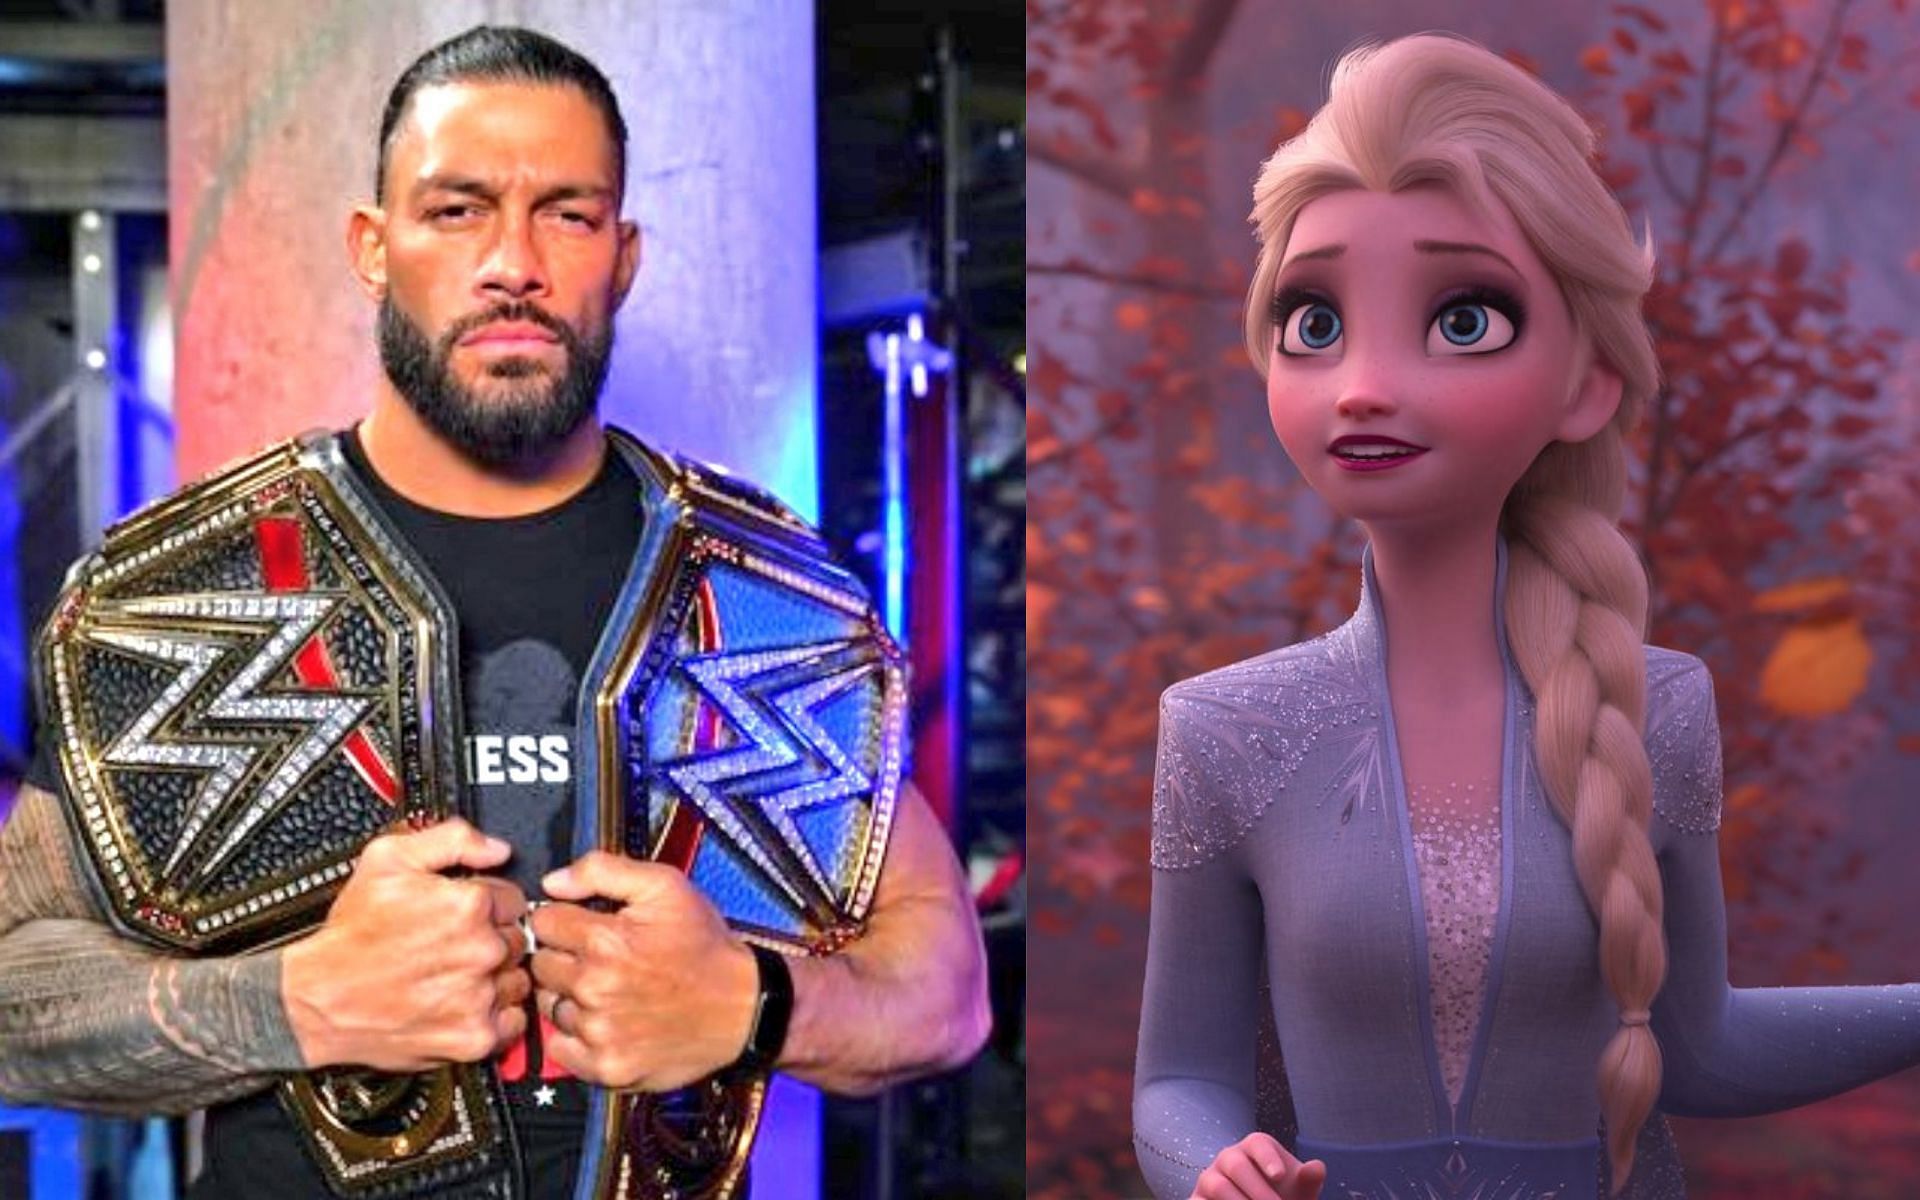 Roman Reigns and Elsa have more in common than fans may think